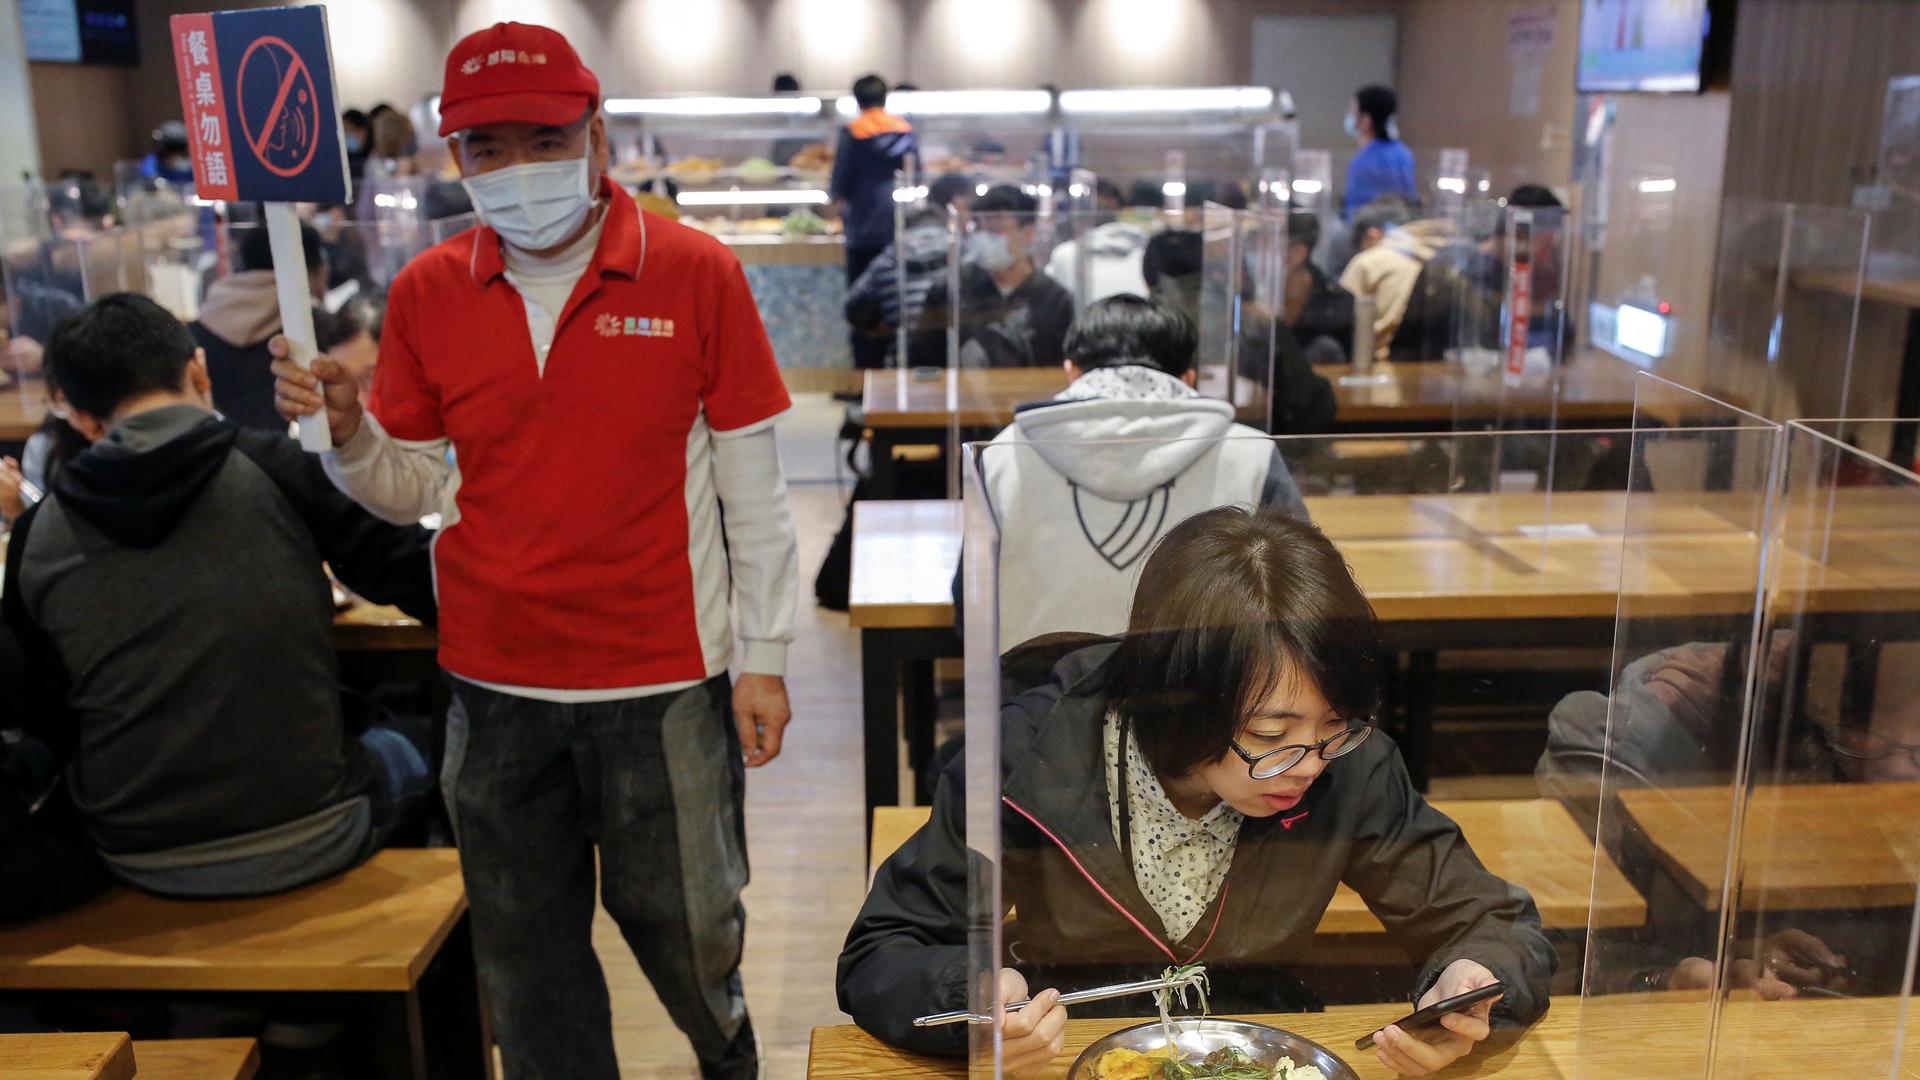 Students eat lunch between dividers to protect them from the coronavirus disease (COVID-19) in the canteen of the National Taiwan University of Science and Technology (NTUST) in Taipei, Taiwan, April 6, 2020.